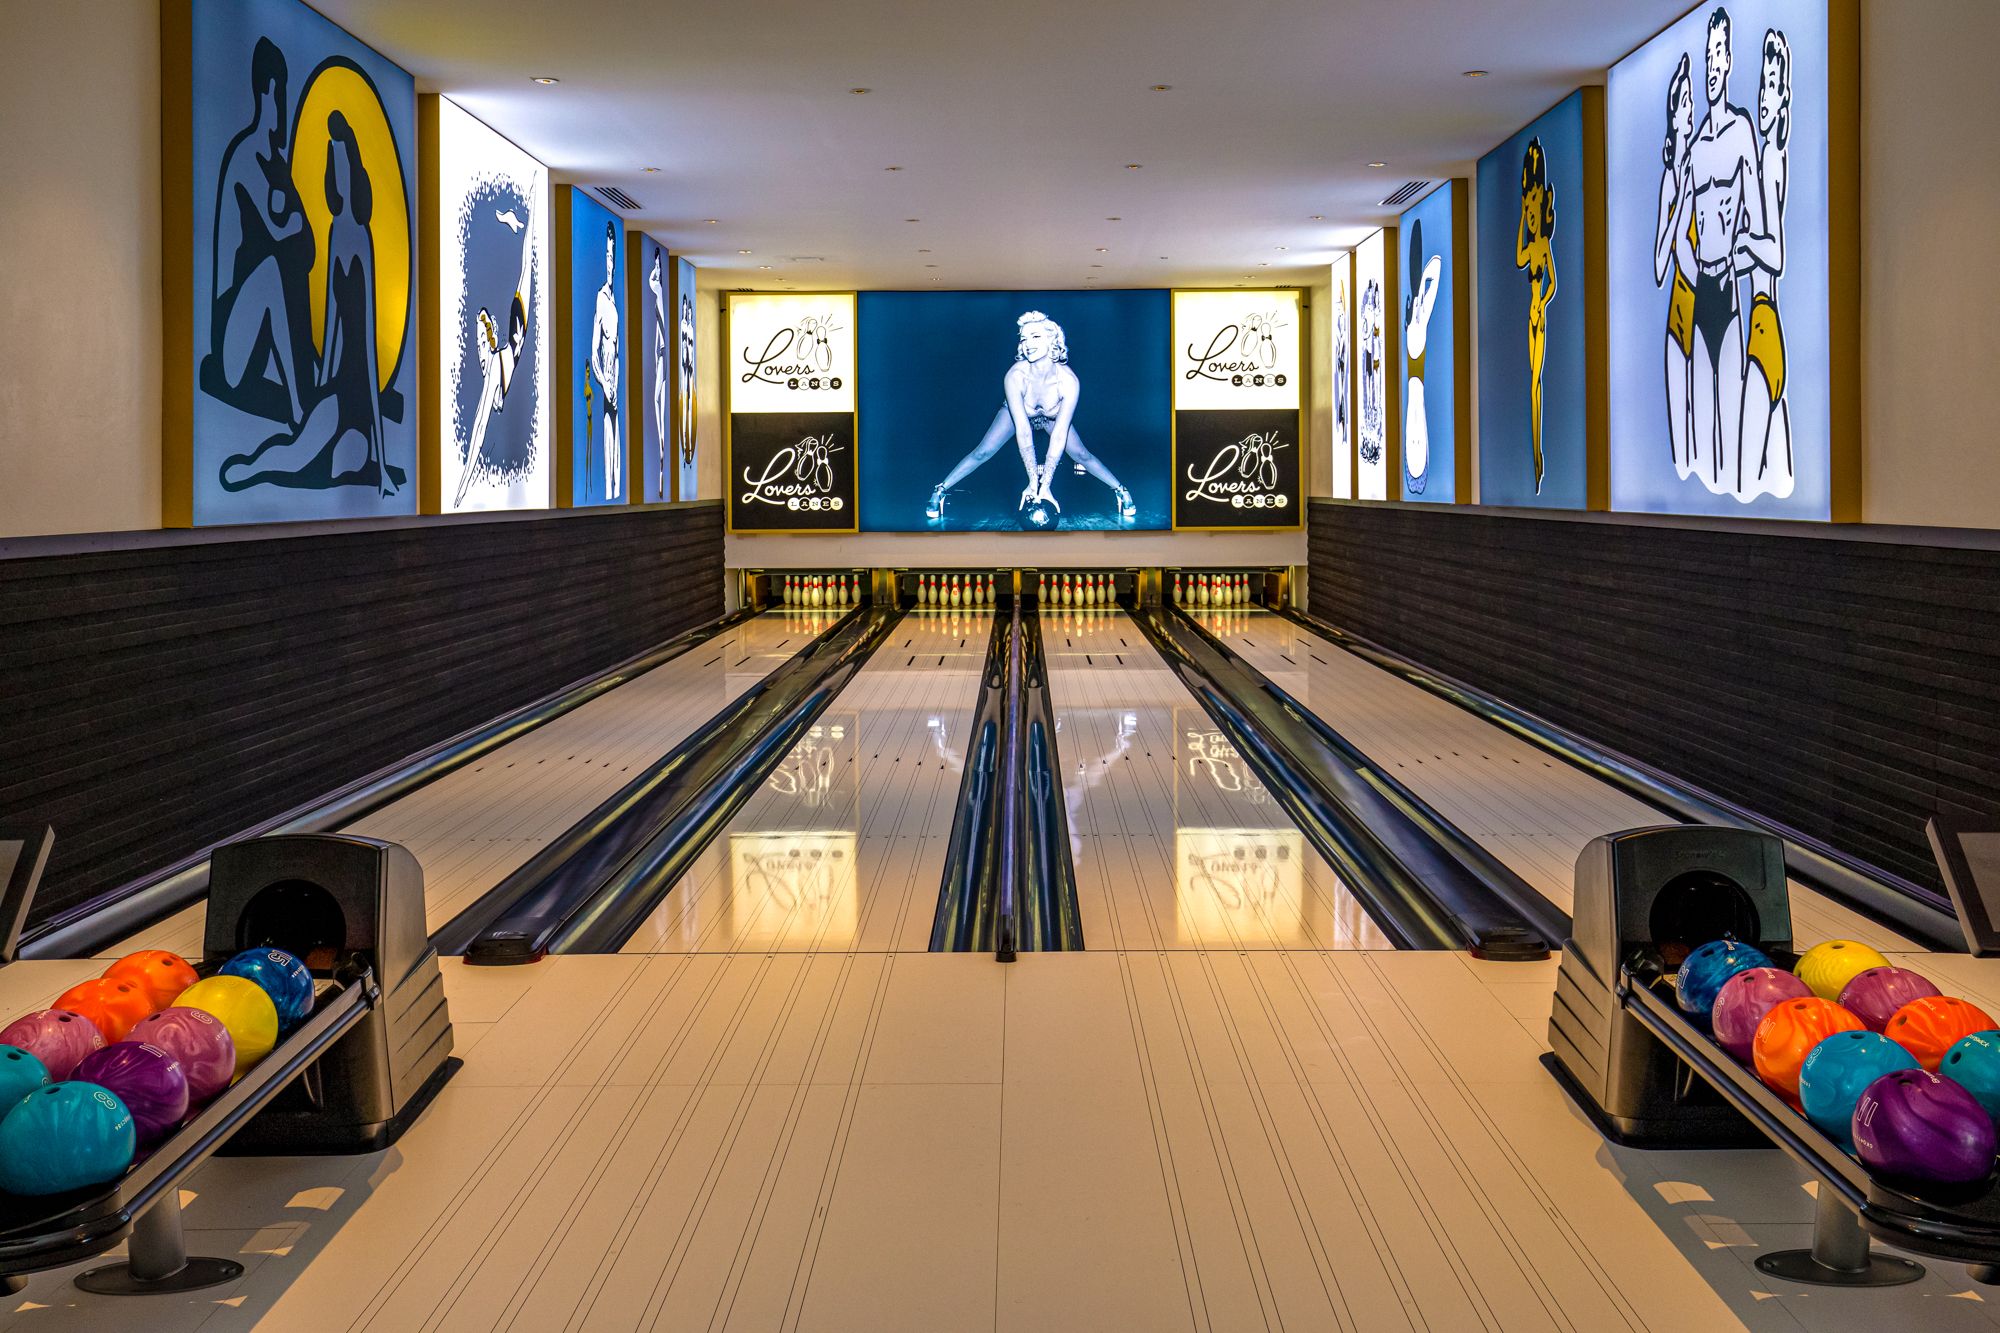 Sandals Royal Barbados Lovers Lanes Bowling Alley